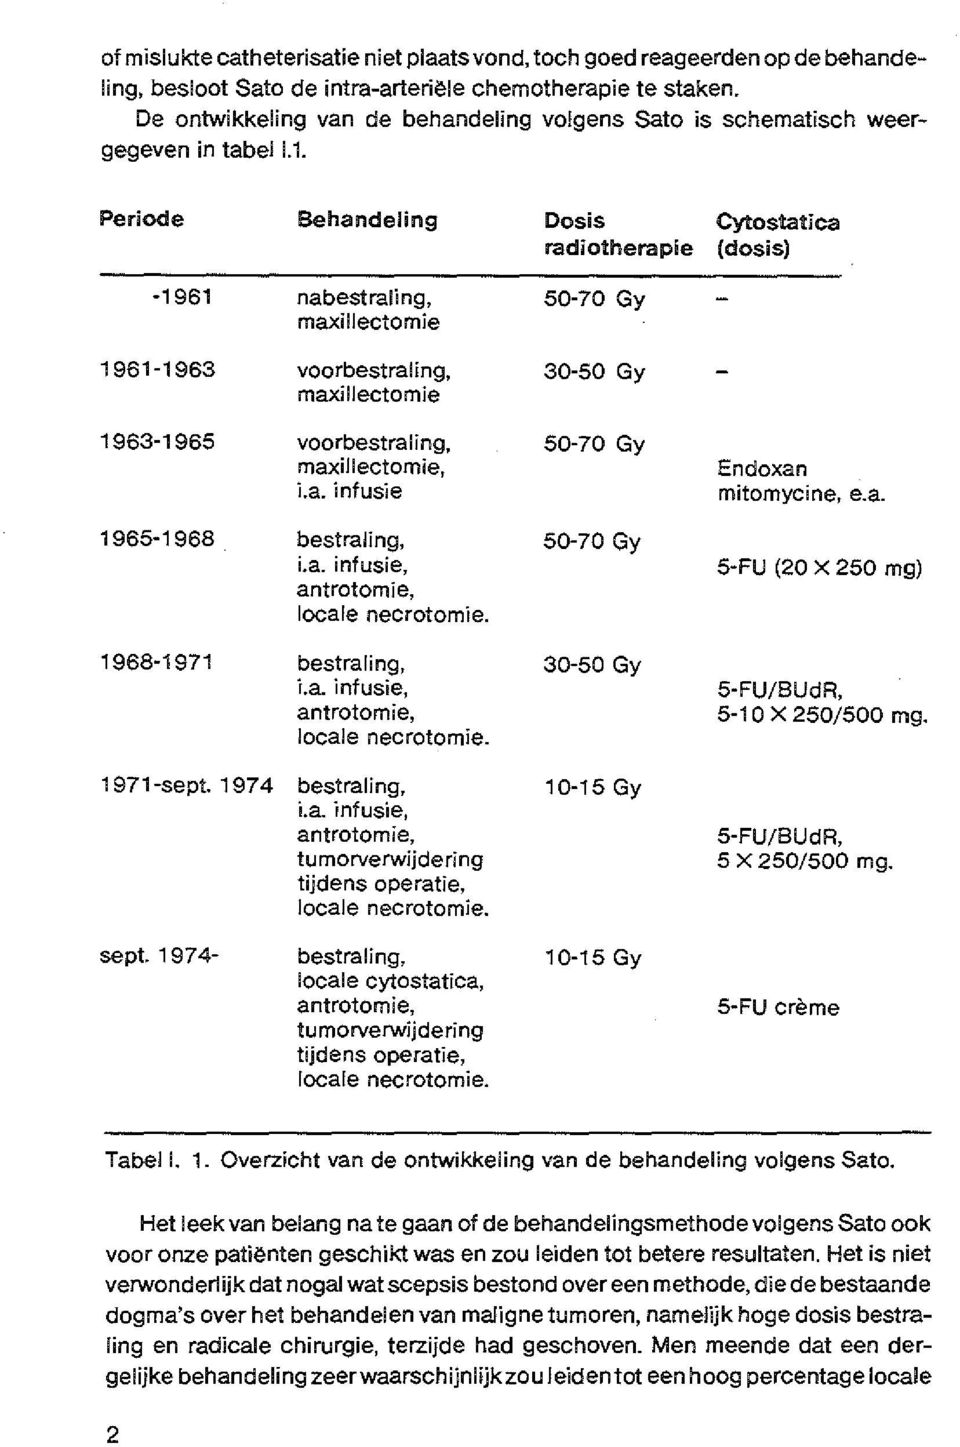 1. Peri ode Behandeling Do sis Cytostatica radiotherapie (dosis) 1961 nabestraling, 50-70 Gy maxillectomie 1961-1963 voorbestraling, 30-50 Gy maxillectomie 1963-1965 voorbestraling, 50-70 Gy